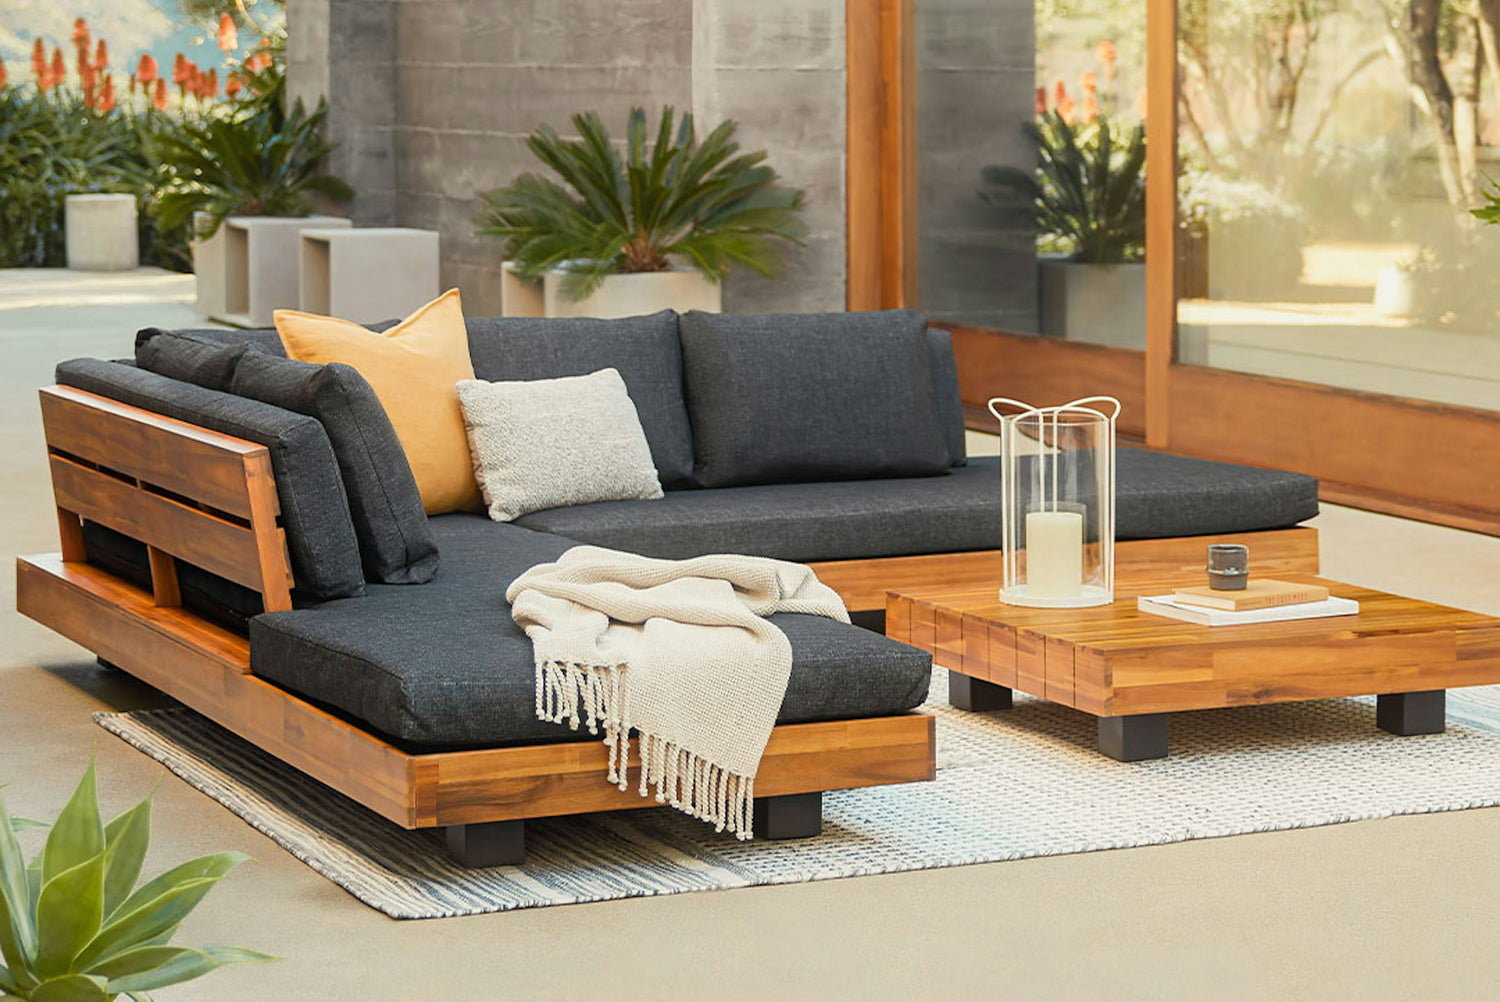 A modern outdoor patio setup featuring a wooden sectional sofa with dark cushions, adorned with gray and yellow throw pillows and a beige blanket. A matching wooden coffee table holds a candle lantern and a small decorative item, with plants in the background.